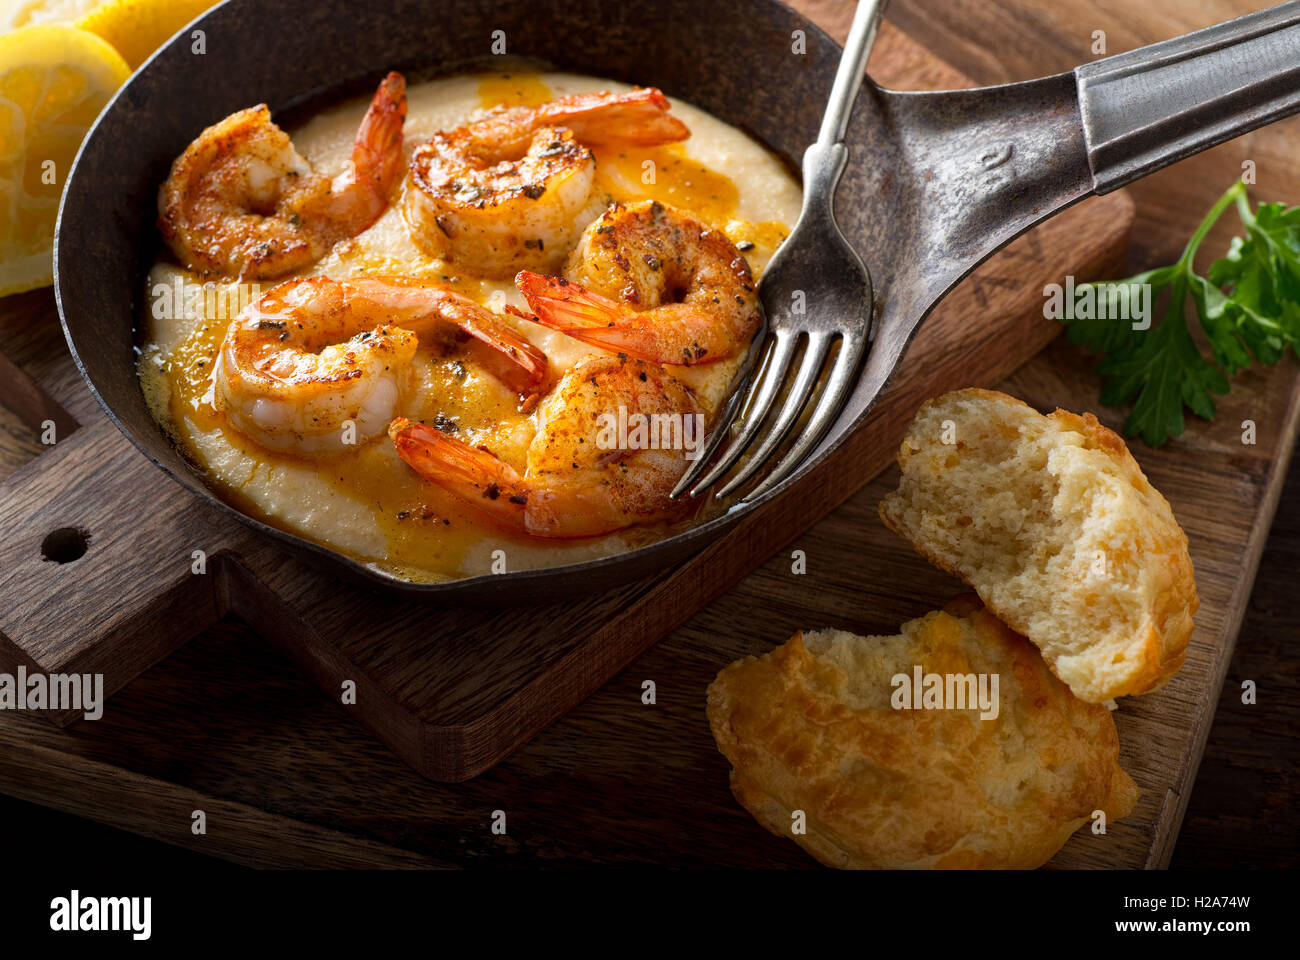 A pan of delicious fresh homemade cajun style shrimp and grits with cheddar biscuit. Stock Photo